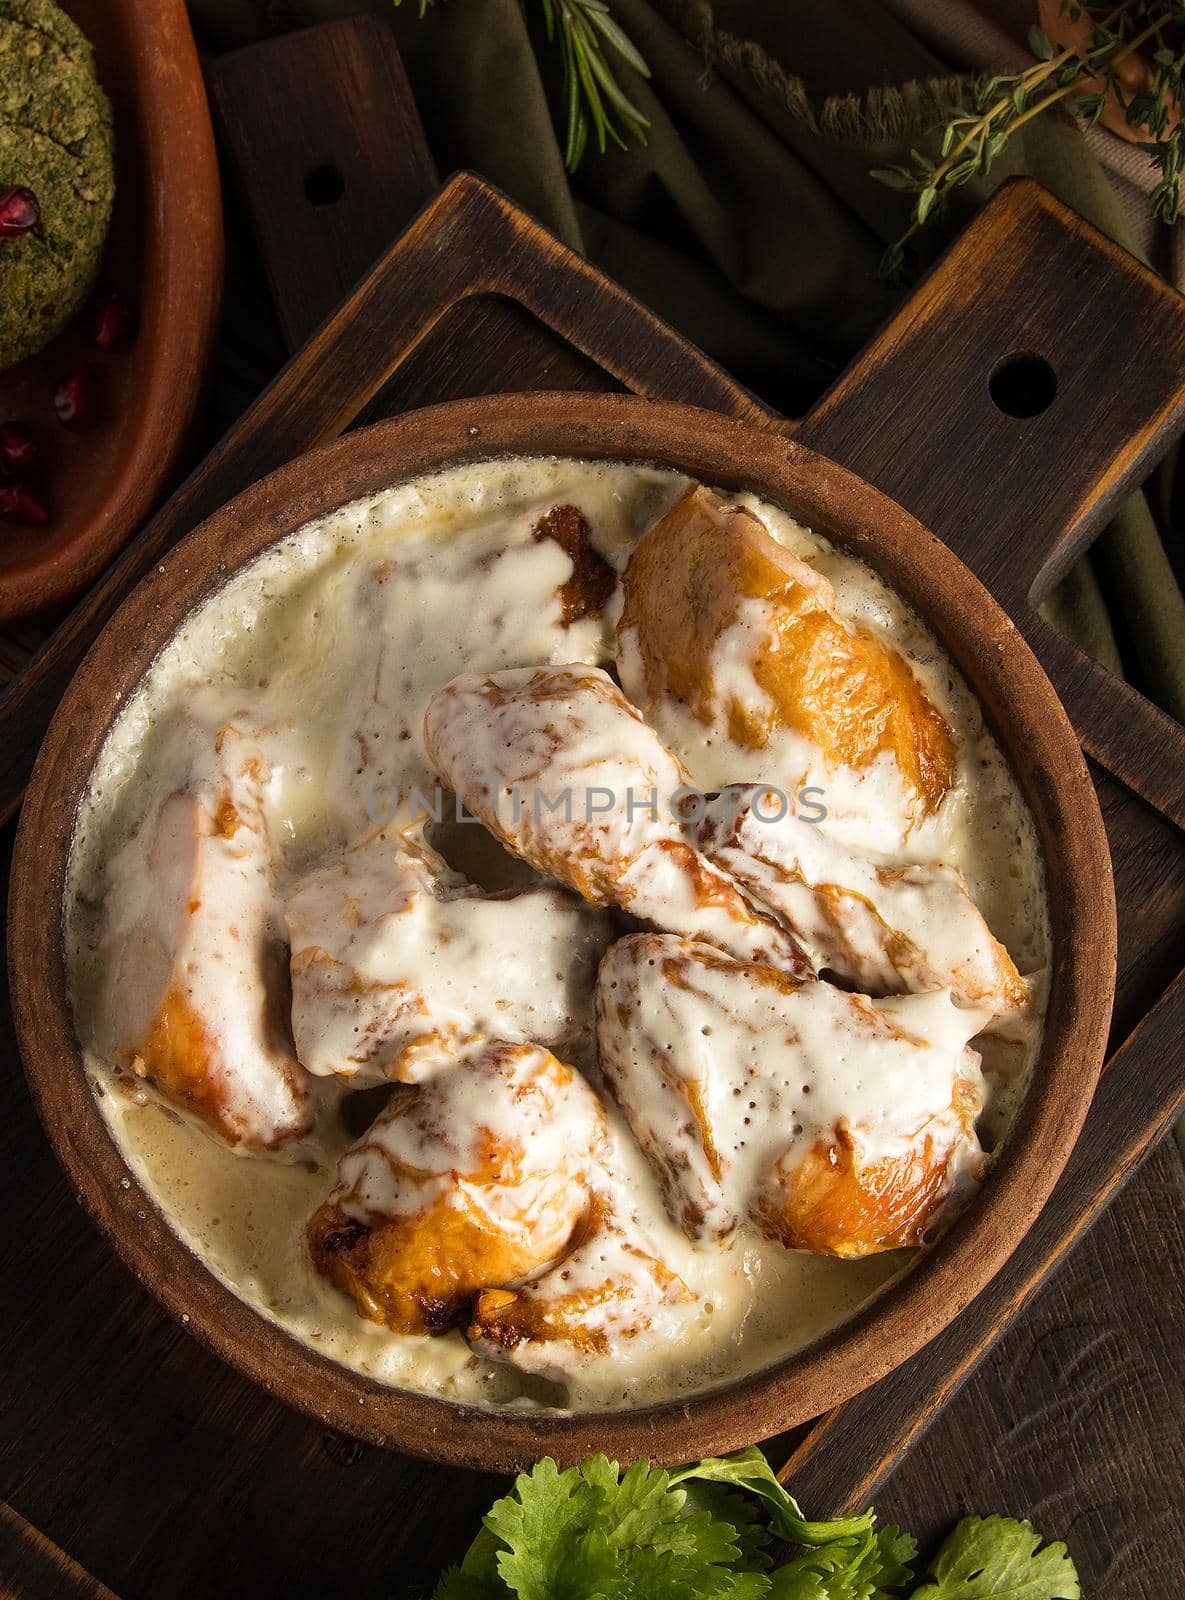 Top view of a chicken covered in a creamy sauce by A_Karim